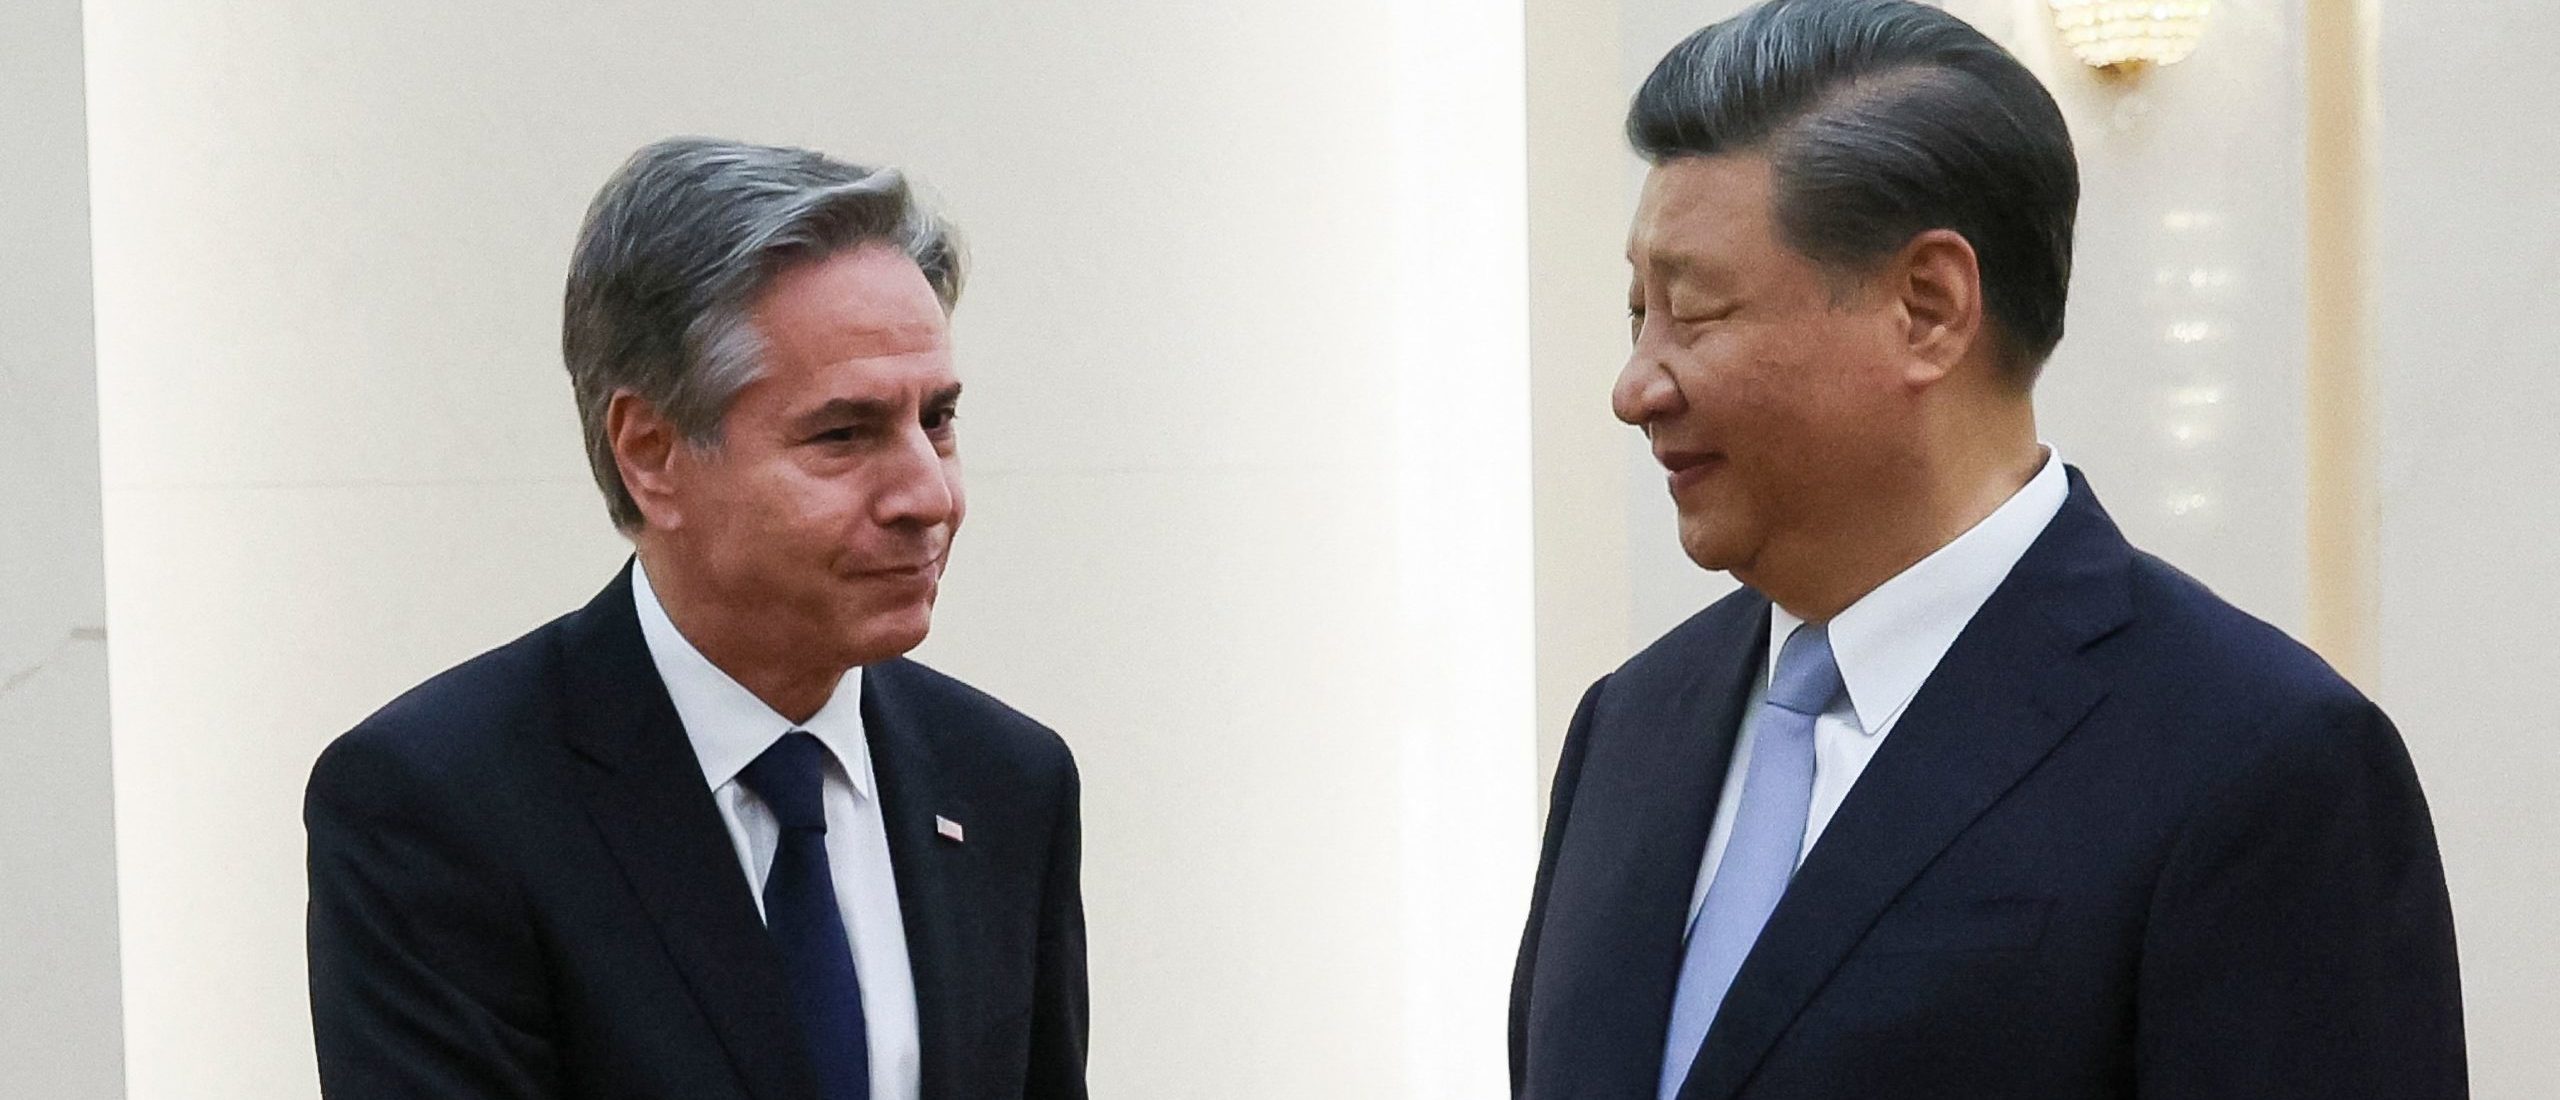 US Secretary of State Antony Blinken (L) shakes hands with China's President Xi Jinping at the Great Hall of the People in Beijing on June 19, 2023. (Photo by LEAH MILLIS/POOL/AFP via Getty Images)